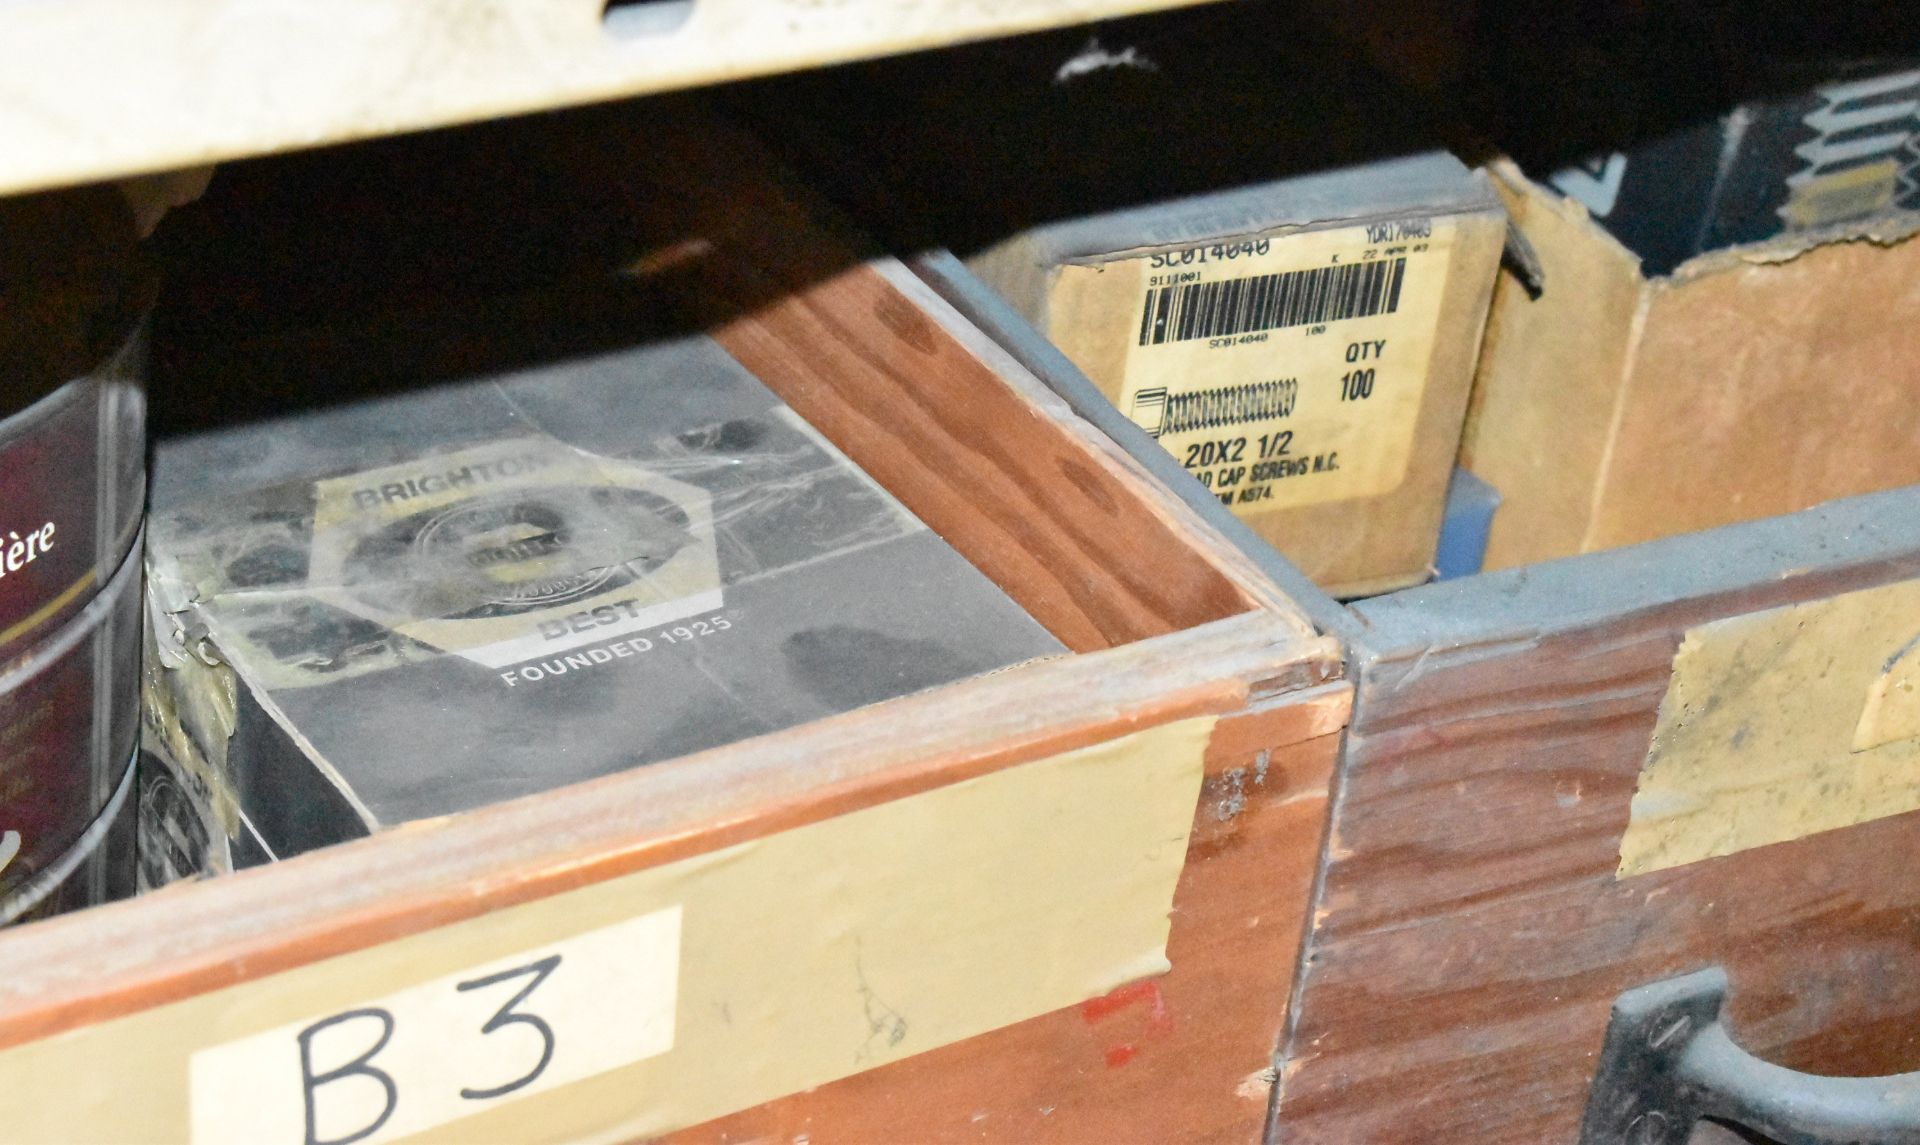 LOT/ STEEL SHELF & DRAWERS WITH CONTENTS - INCLUDING TOOLING, HARDWARE, GRINDING WHEELS & SHOP - Image 9 of 9